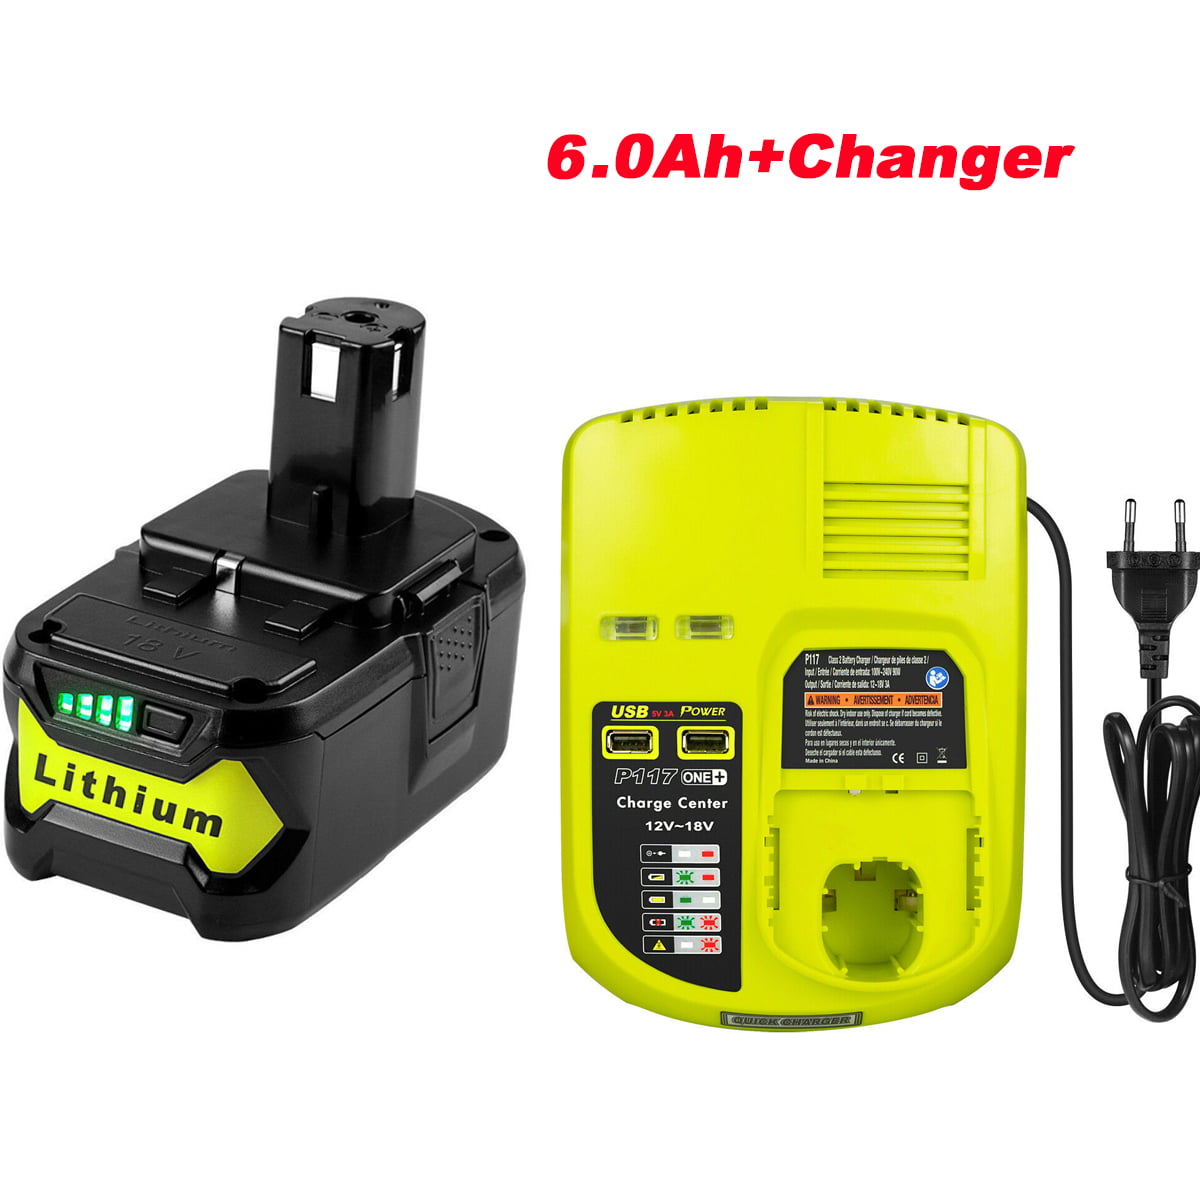 6.0Ah 18 VOLT P108 for RYOBI 18V ONE PLUS Lithium High Capacity Battery /Charger 